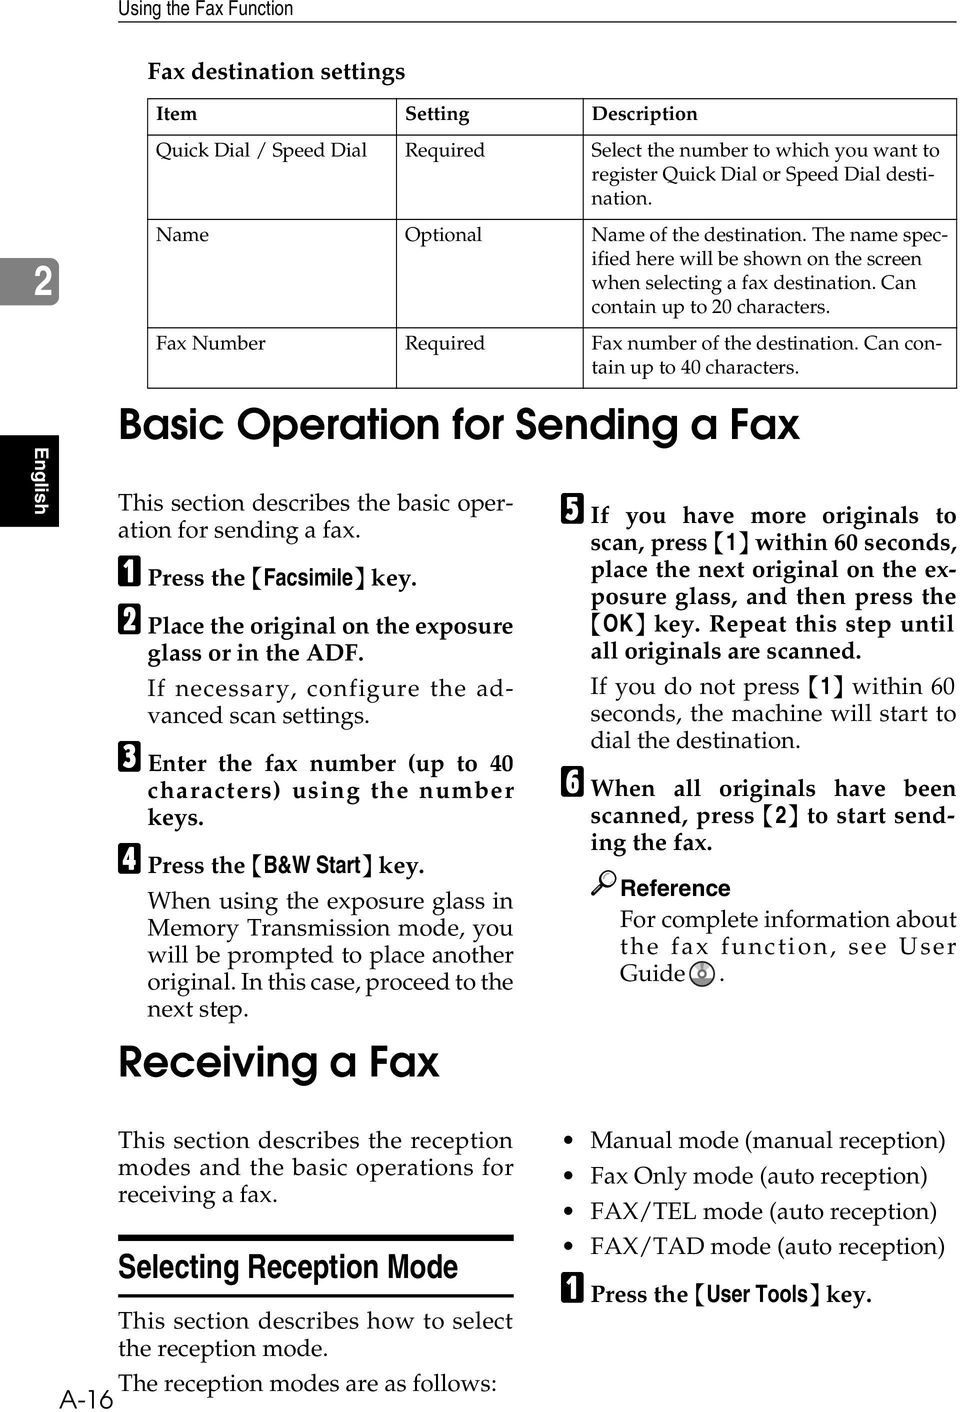 Fax Number Required Fax number of the destination. Can contain up to 40 characters. English Basic Operation for Sending a Fax This section describes the basic operation for sending a fax.